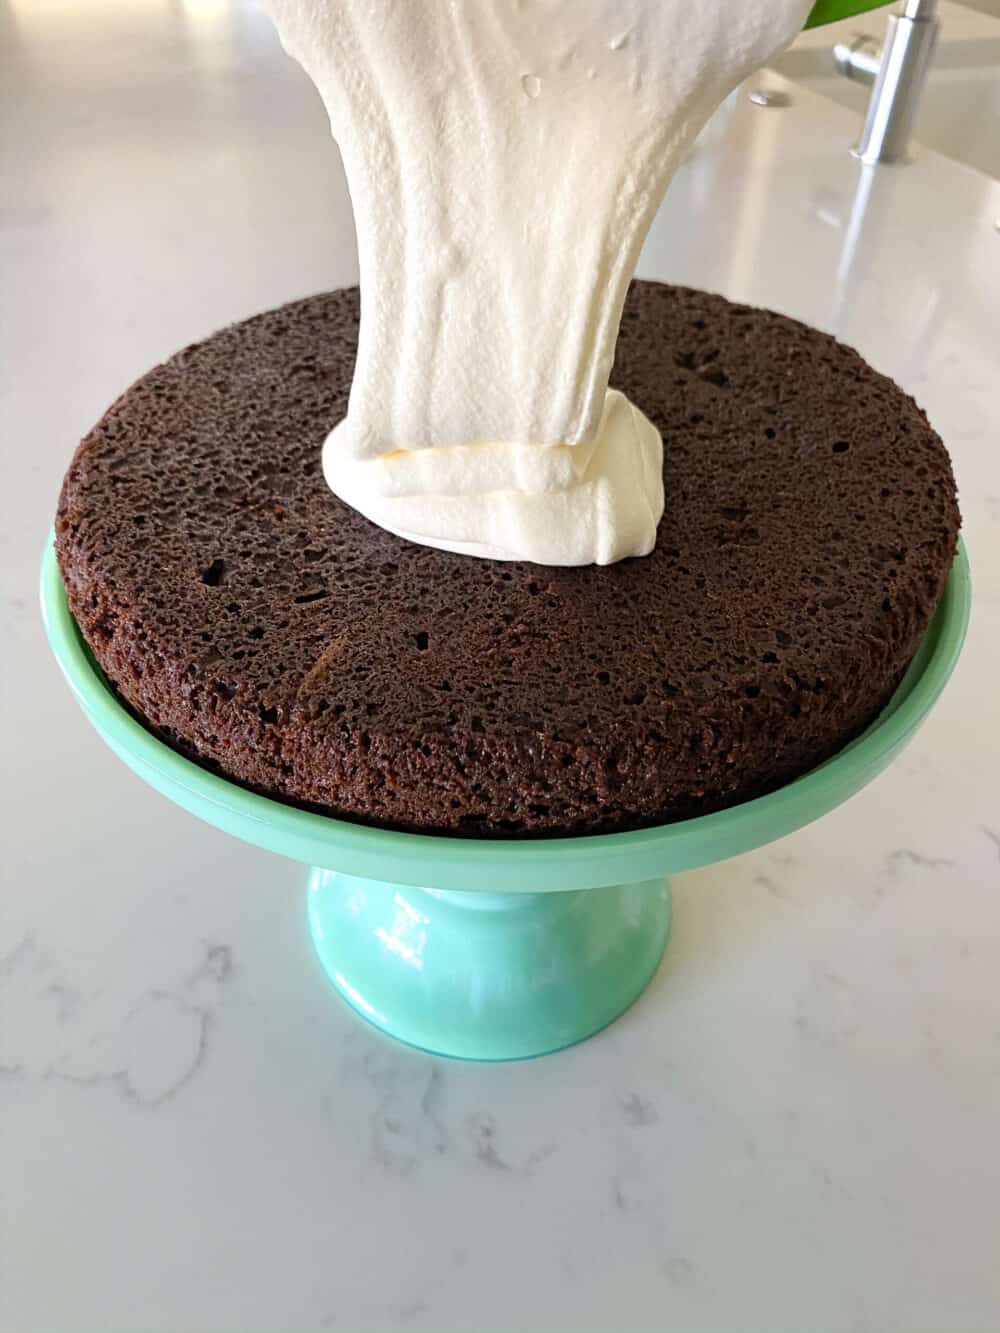 top first cake layer with ding dong cake filling